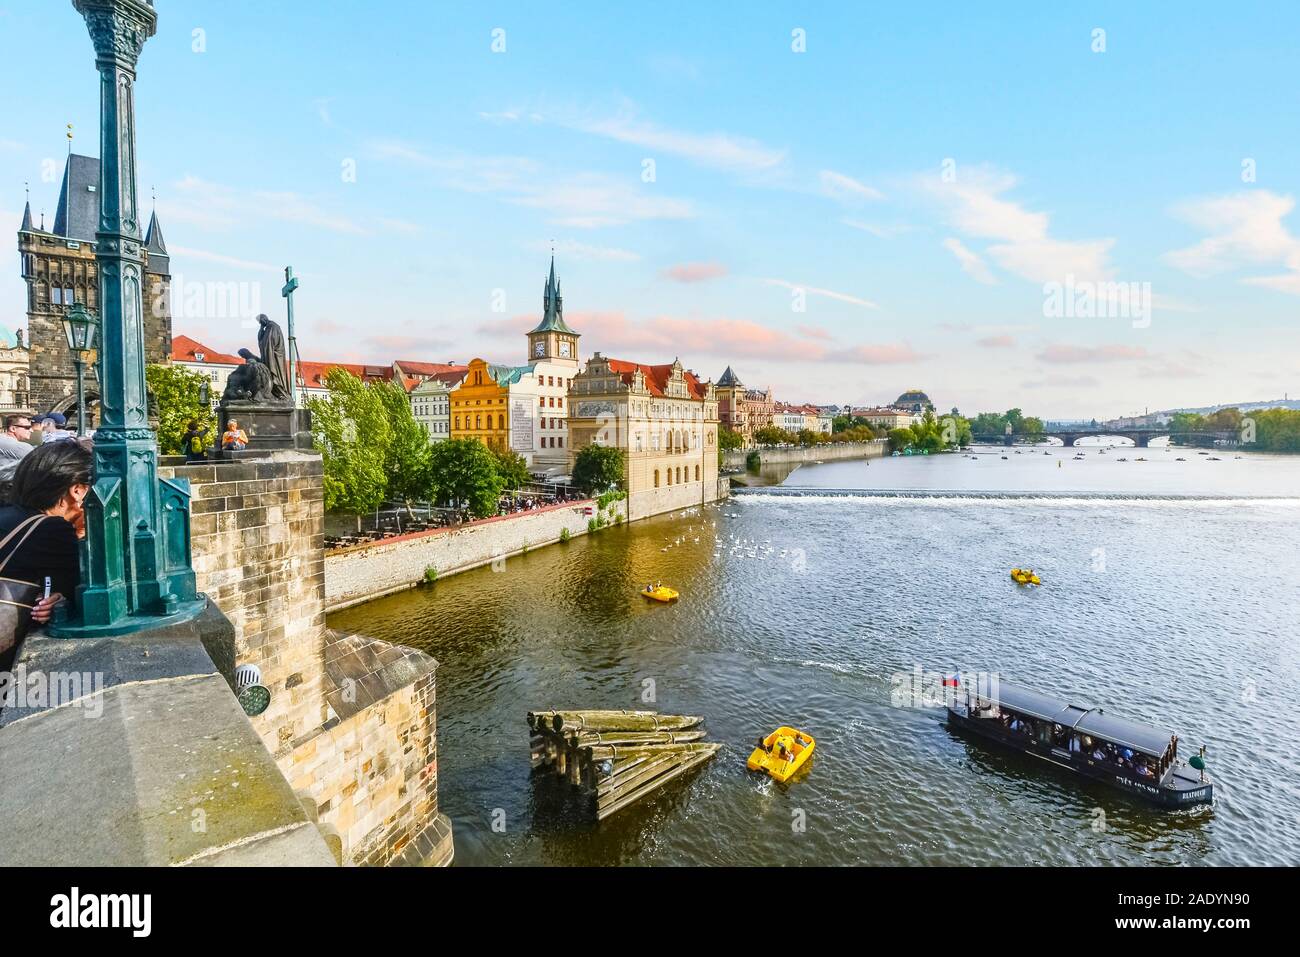 A young woman relaxes on the Charles Bridge as pedal and tourist boats cruise alongside the swans in the Vltava River in Prague, Czechia. Stock Photo